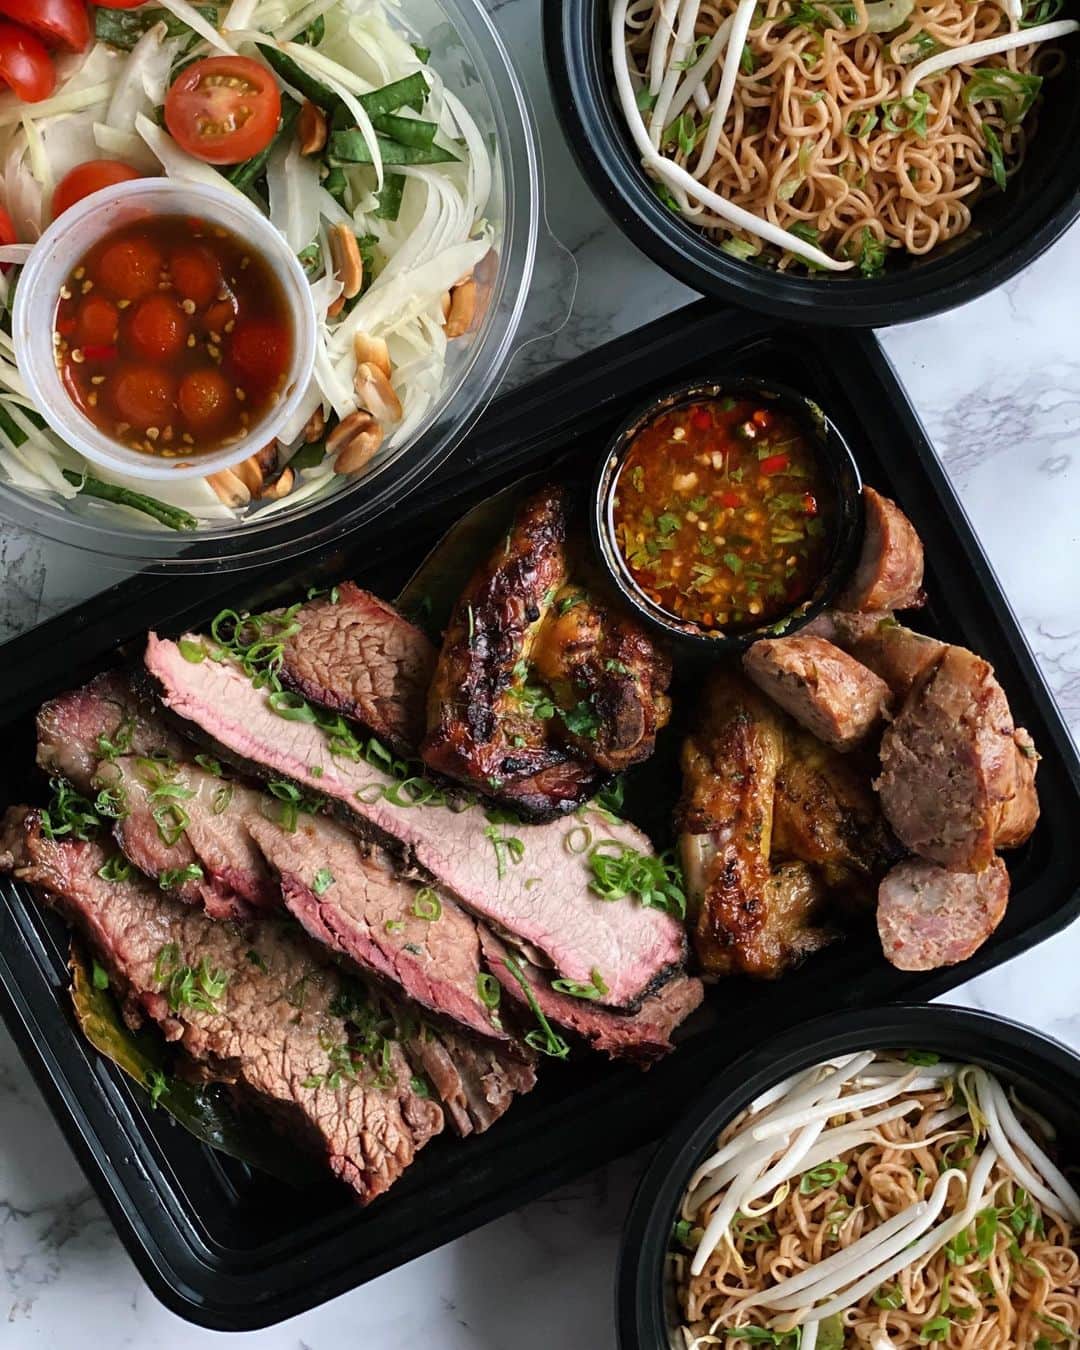 Antonietteのインスタグラム：「Hands down the best ahaan Lao (Lao food) in San Diego! Was so thrilled to order a Labor Day ready to eat feast prepared by family run  @baankeo . Flavorful smoked  brisket, grilled chicken wangs, papaya salad (thum mak hoong), stir fried noodles and an order of sausages. This was all finished off with an iced cold dessert of sweet coconut milk, fruits and corn (nam vaan). Sooo saaaap (delicious)! You could taste the passion this family has for producing quality, well prepared food. Will order from again, and you should too! 😉」